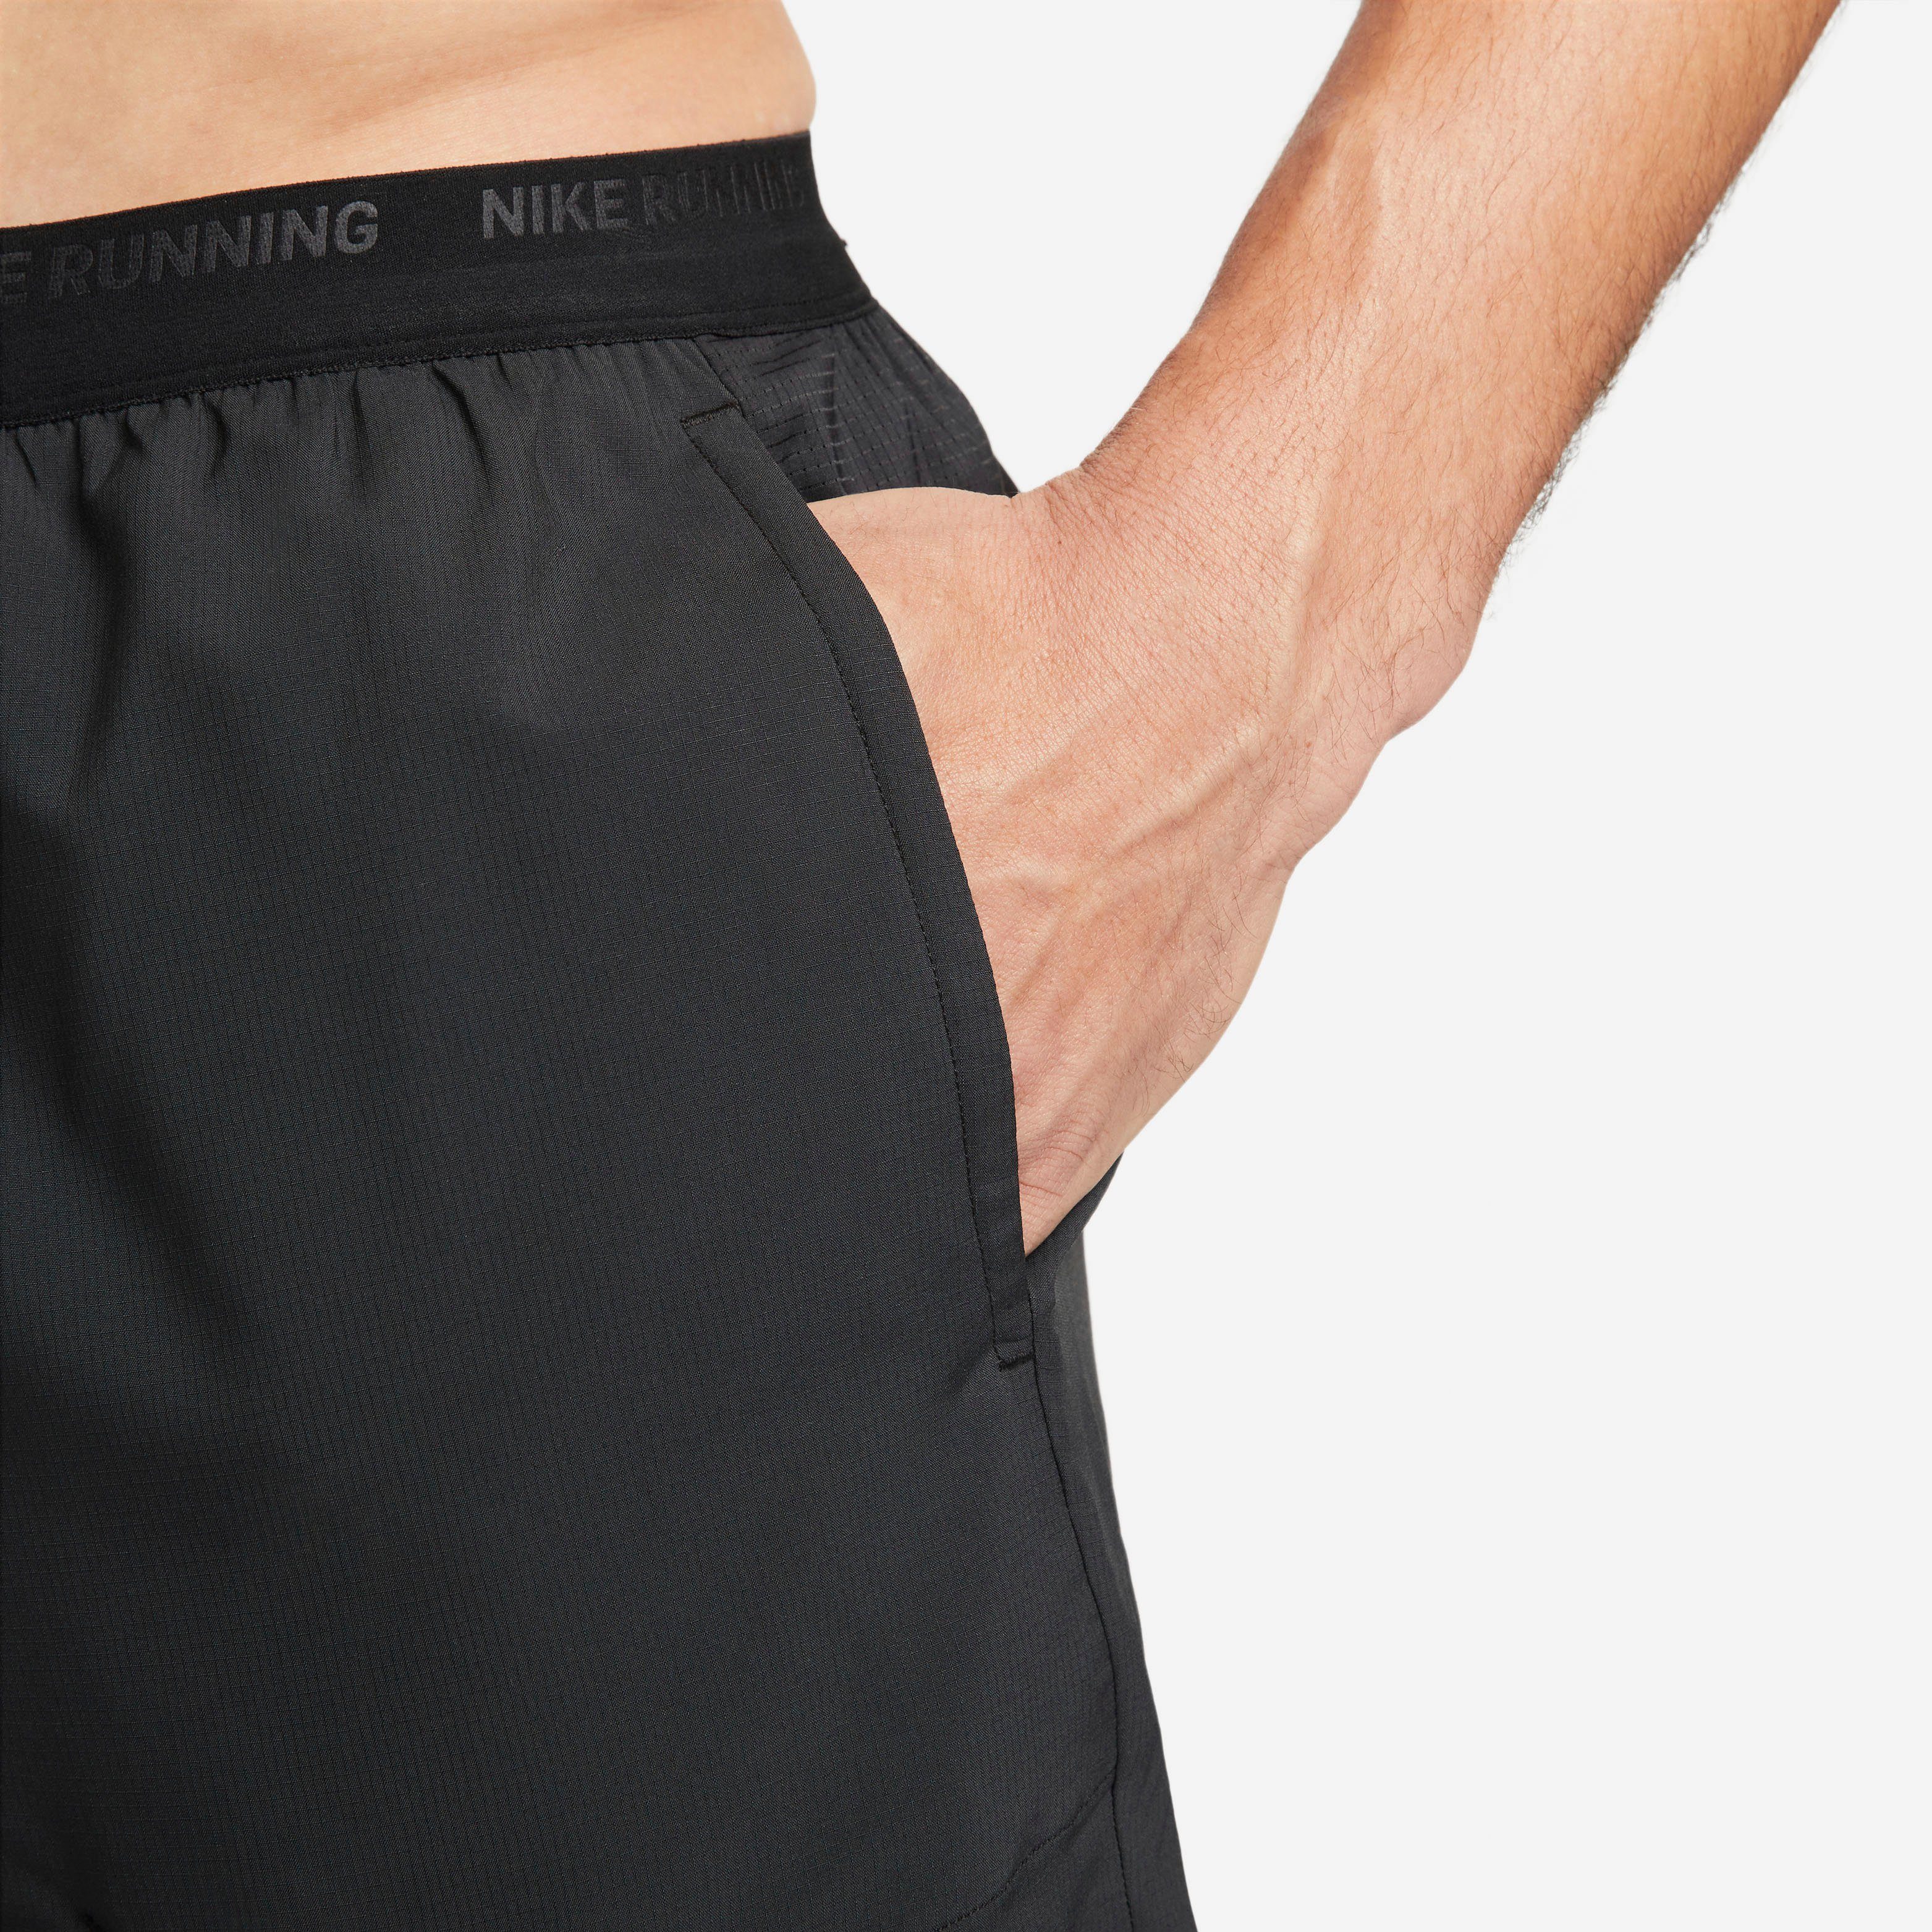 Nike Laufshorts Running Men's Stride " Shorts Brief-Lined Dri-FIT